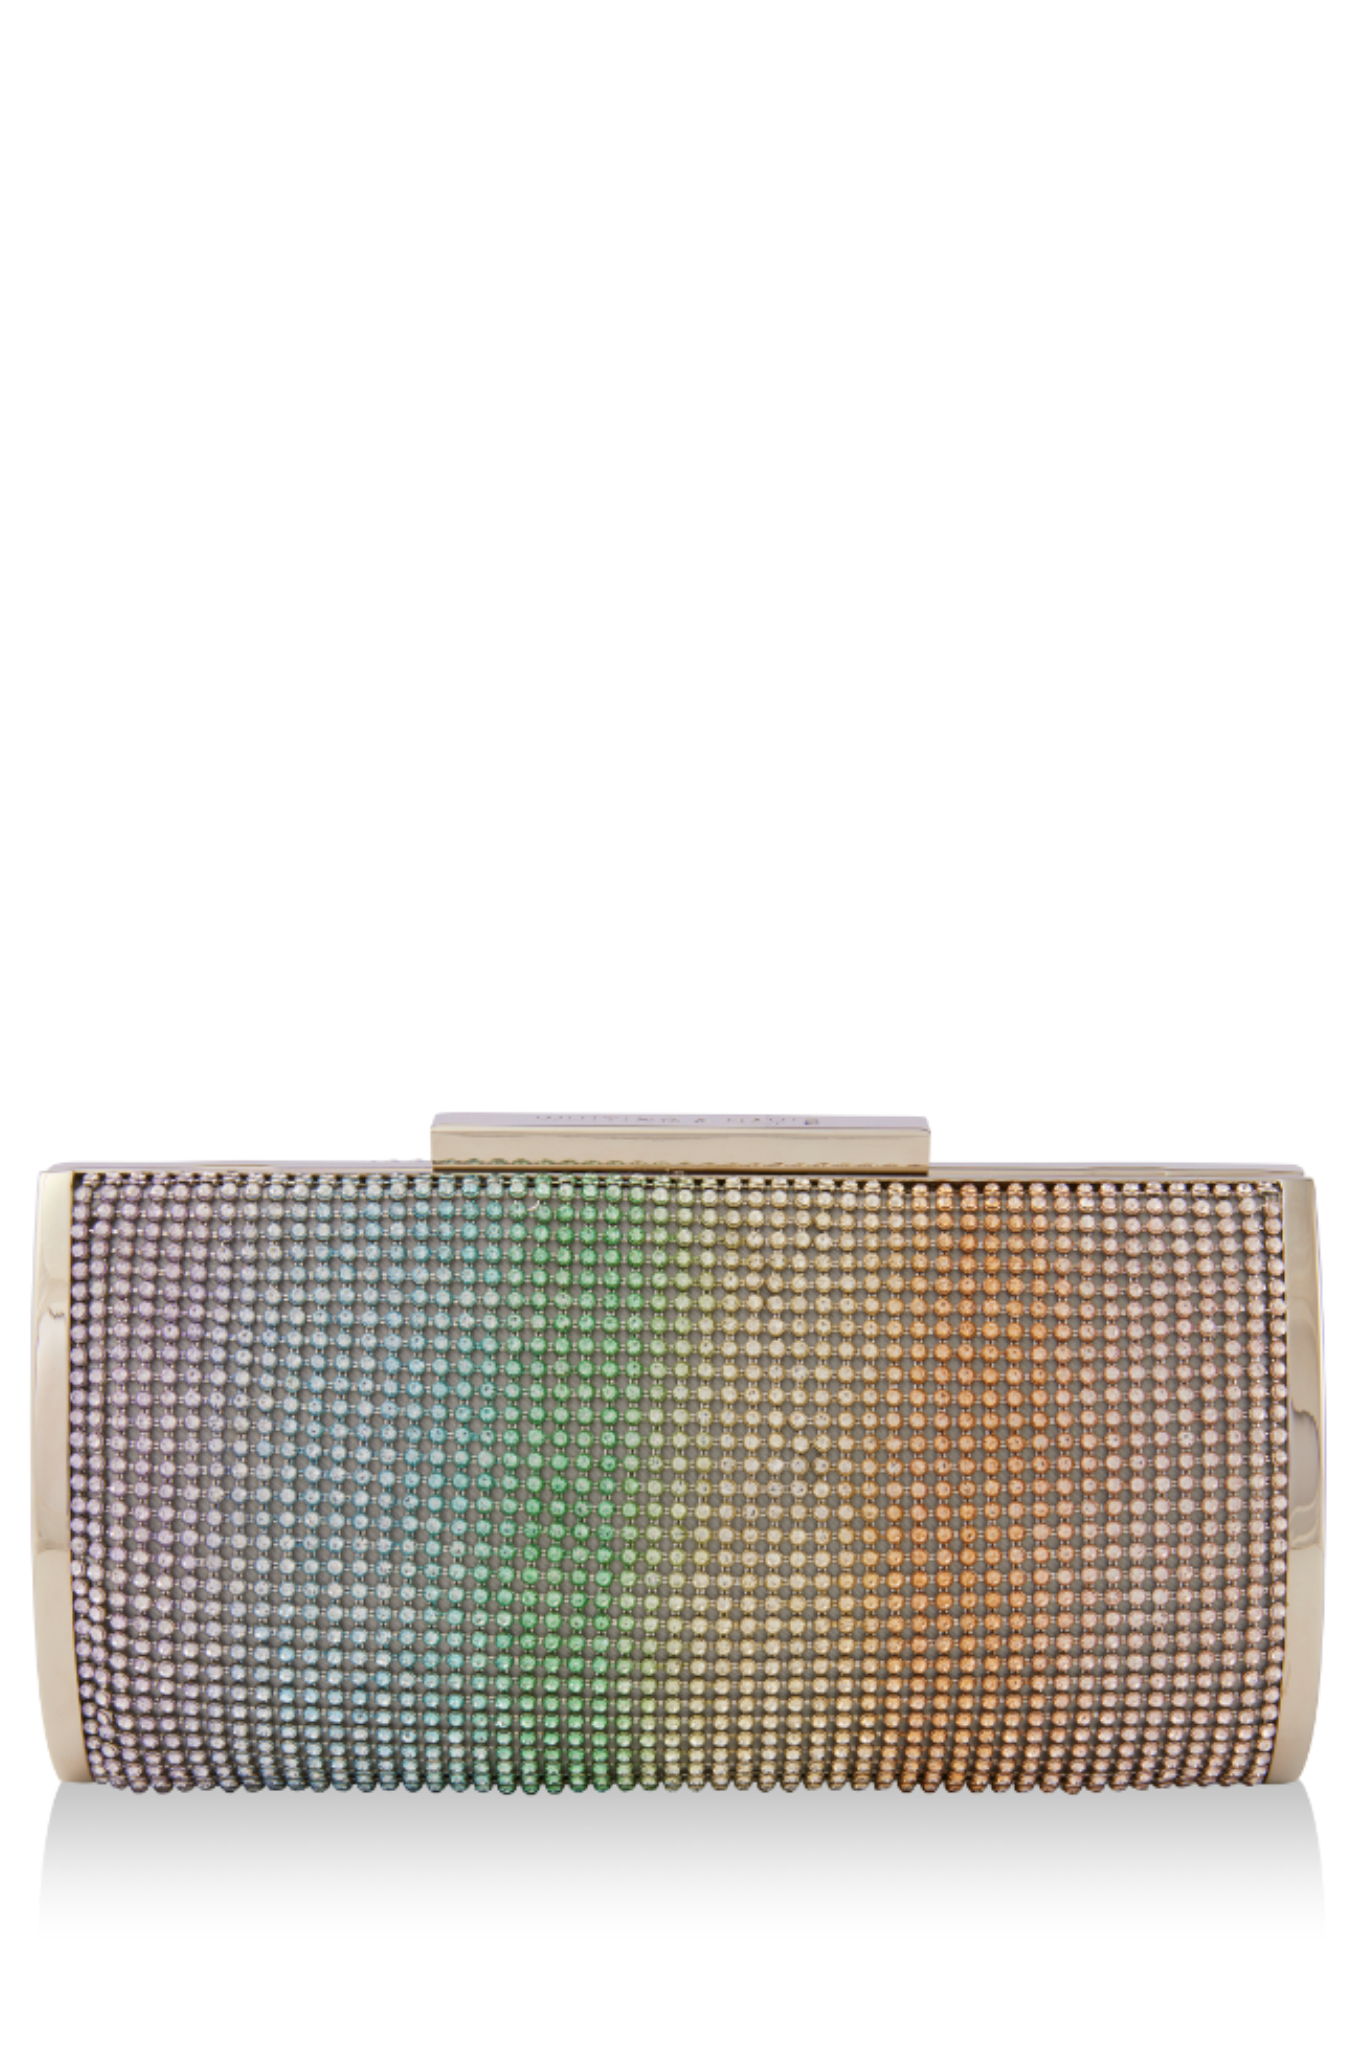 Crystal Rainbow Clutch by Whiting and Davis - RENTAL